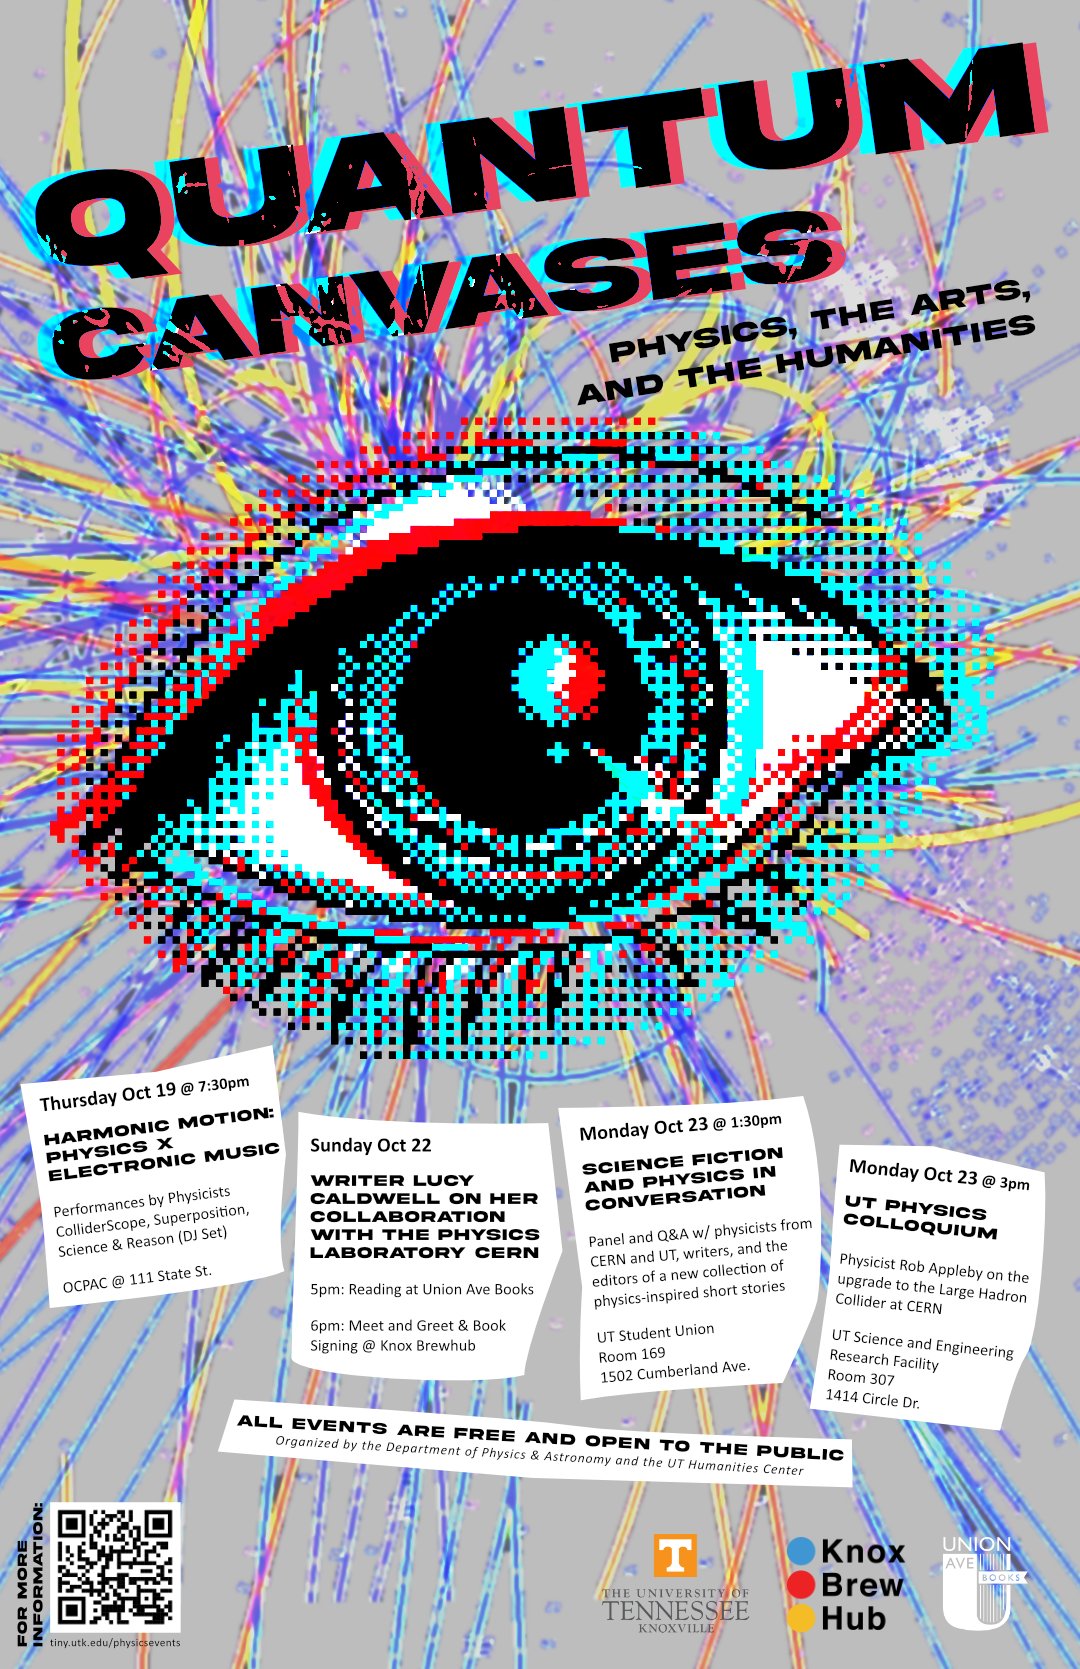 A modern, psychedelic-style poster shows a large open eye staring at the viewer